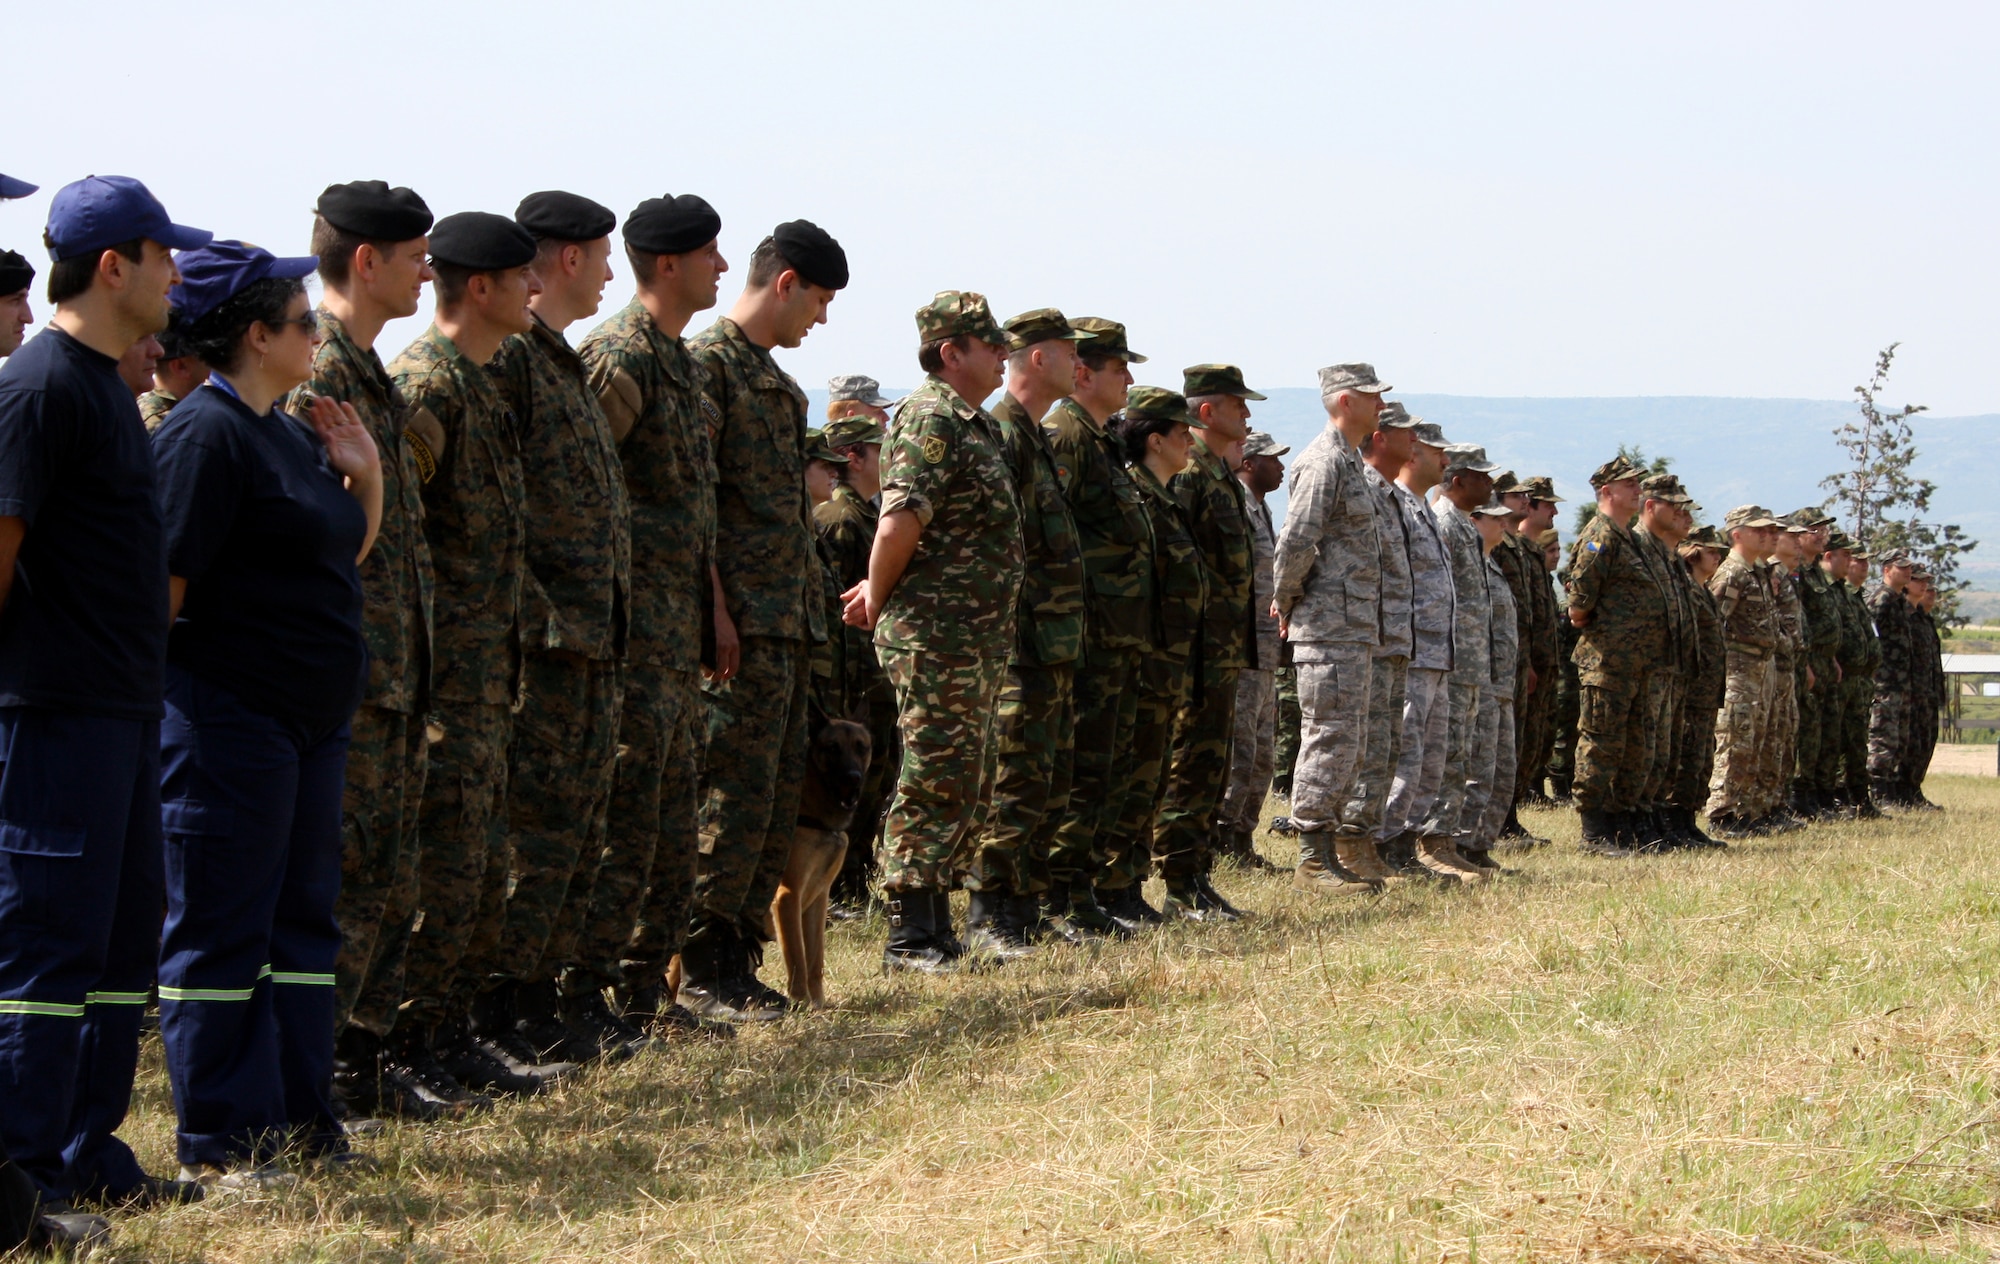 CAMP PEPELISHTE, Macedonia – Service members from Macedonia, Montenegro, Bosnia and Herzegovina, Serbia, Slovenia, Norway and the United States stand at parade rest during opening comments at the Medical Training Exercise in Central and Eastern Europe 2011 opening ceremony here June 6.  MEDCEUR is a Partnership for Peace and Chairman of the Joint Chiefs of Staff-sponsored regional and multilateral exercise in Central and Eastern Europe designed to provide medical training and operational experience in a deployed environment.  (U.S. Air Force photo/Master Sgt. Kelley J. Stewart)